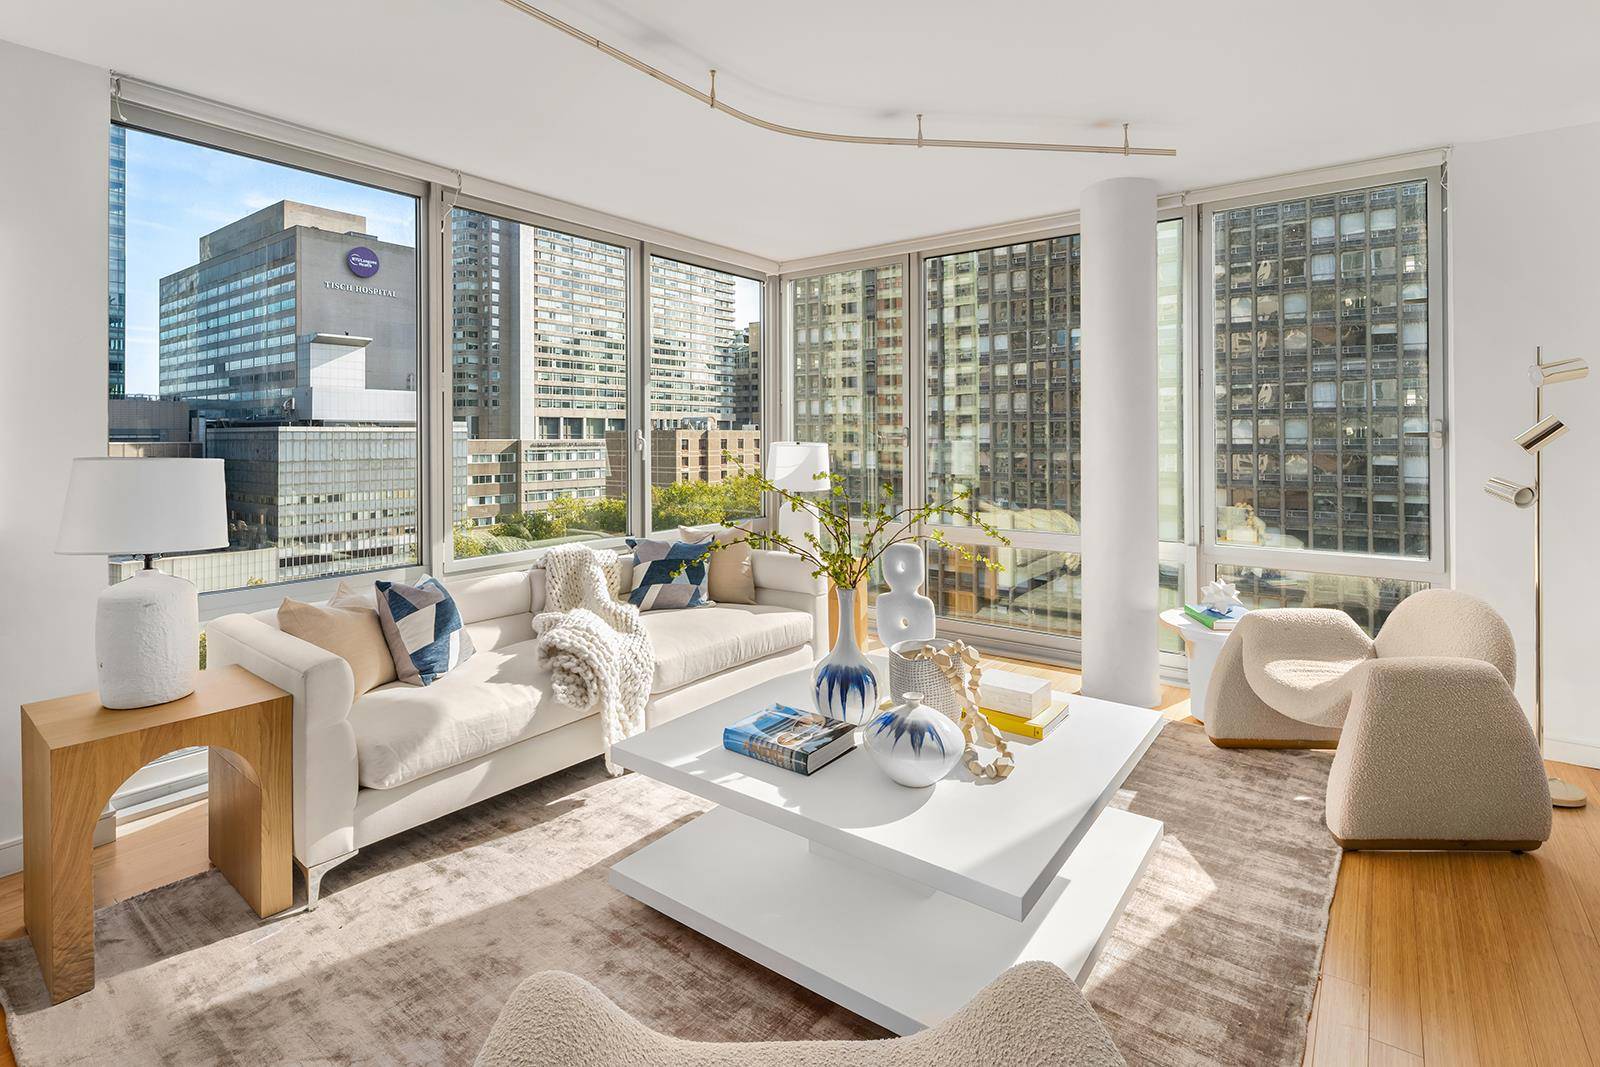 This spectacular 2 bedroom, 2 bathroom residence is situated on the 10th floor of 303 East 33rd Street.